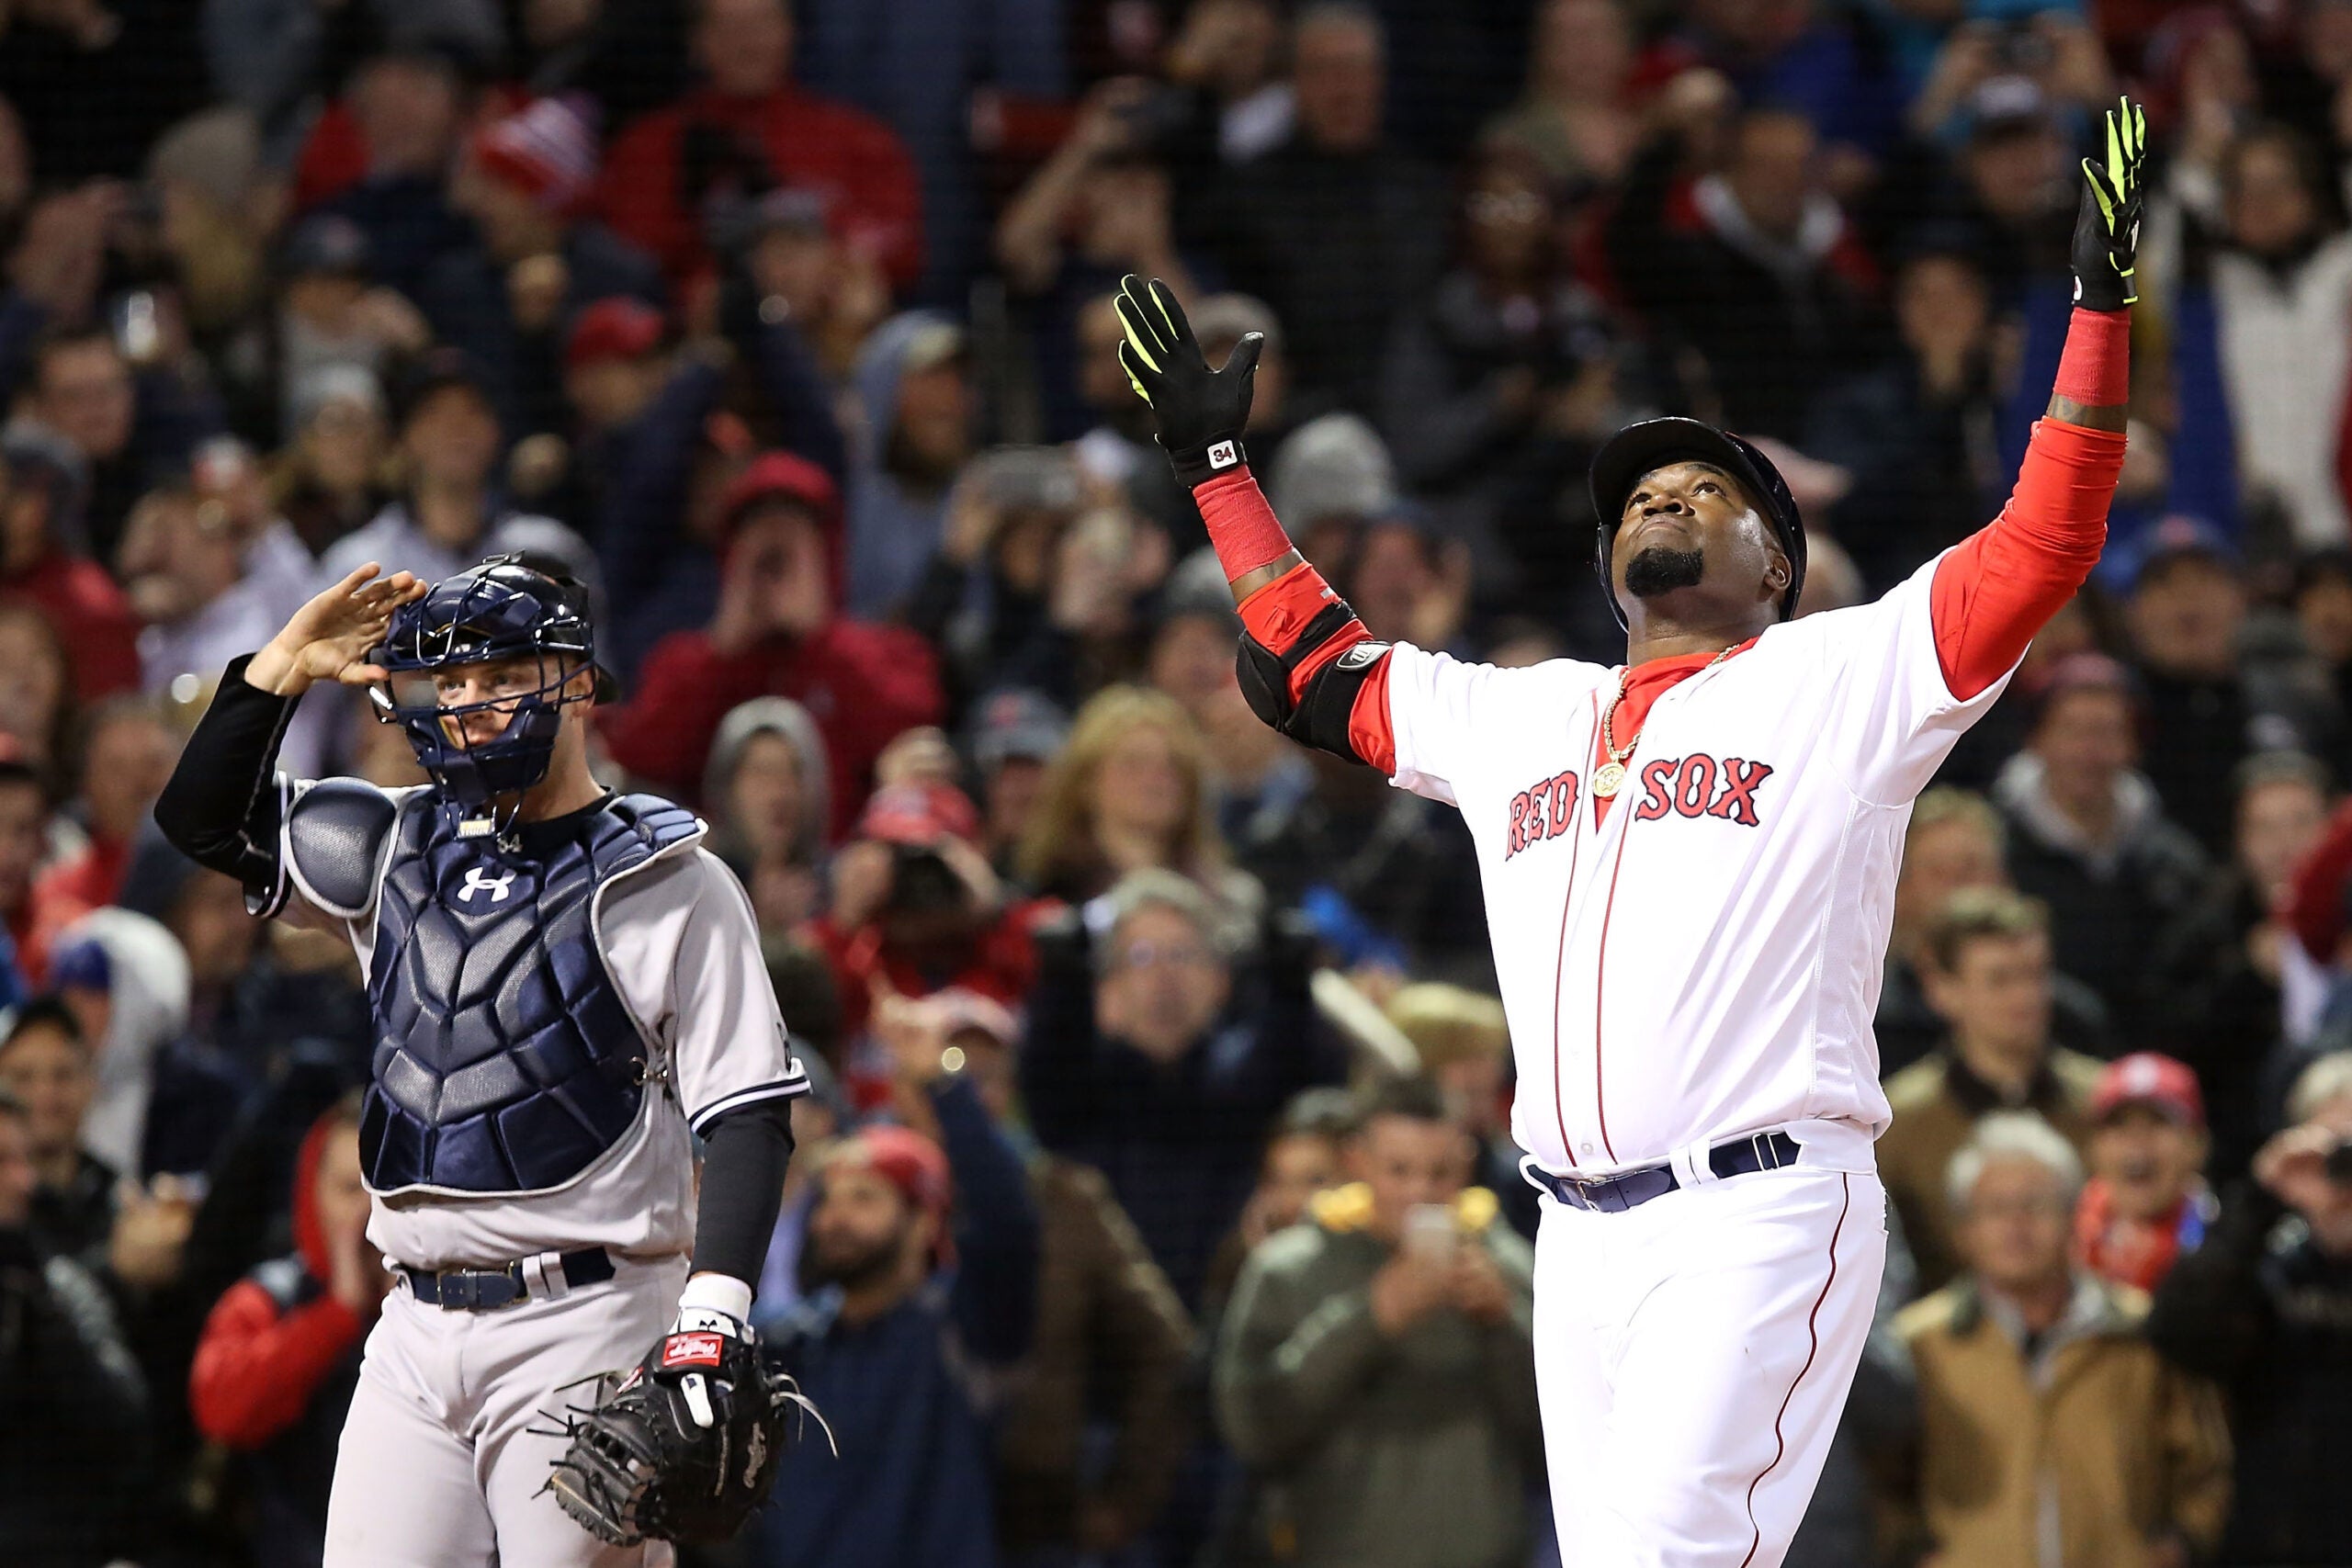 David Ortiz counted on fans to protect him